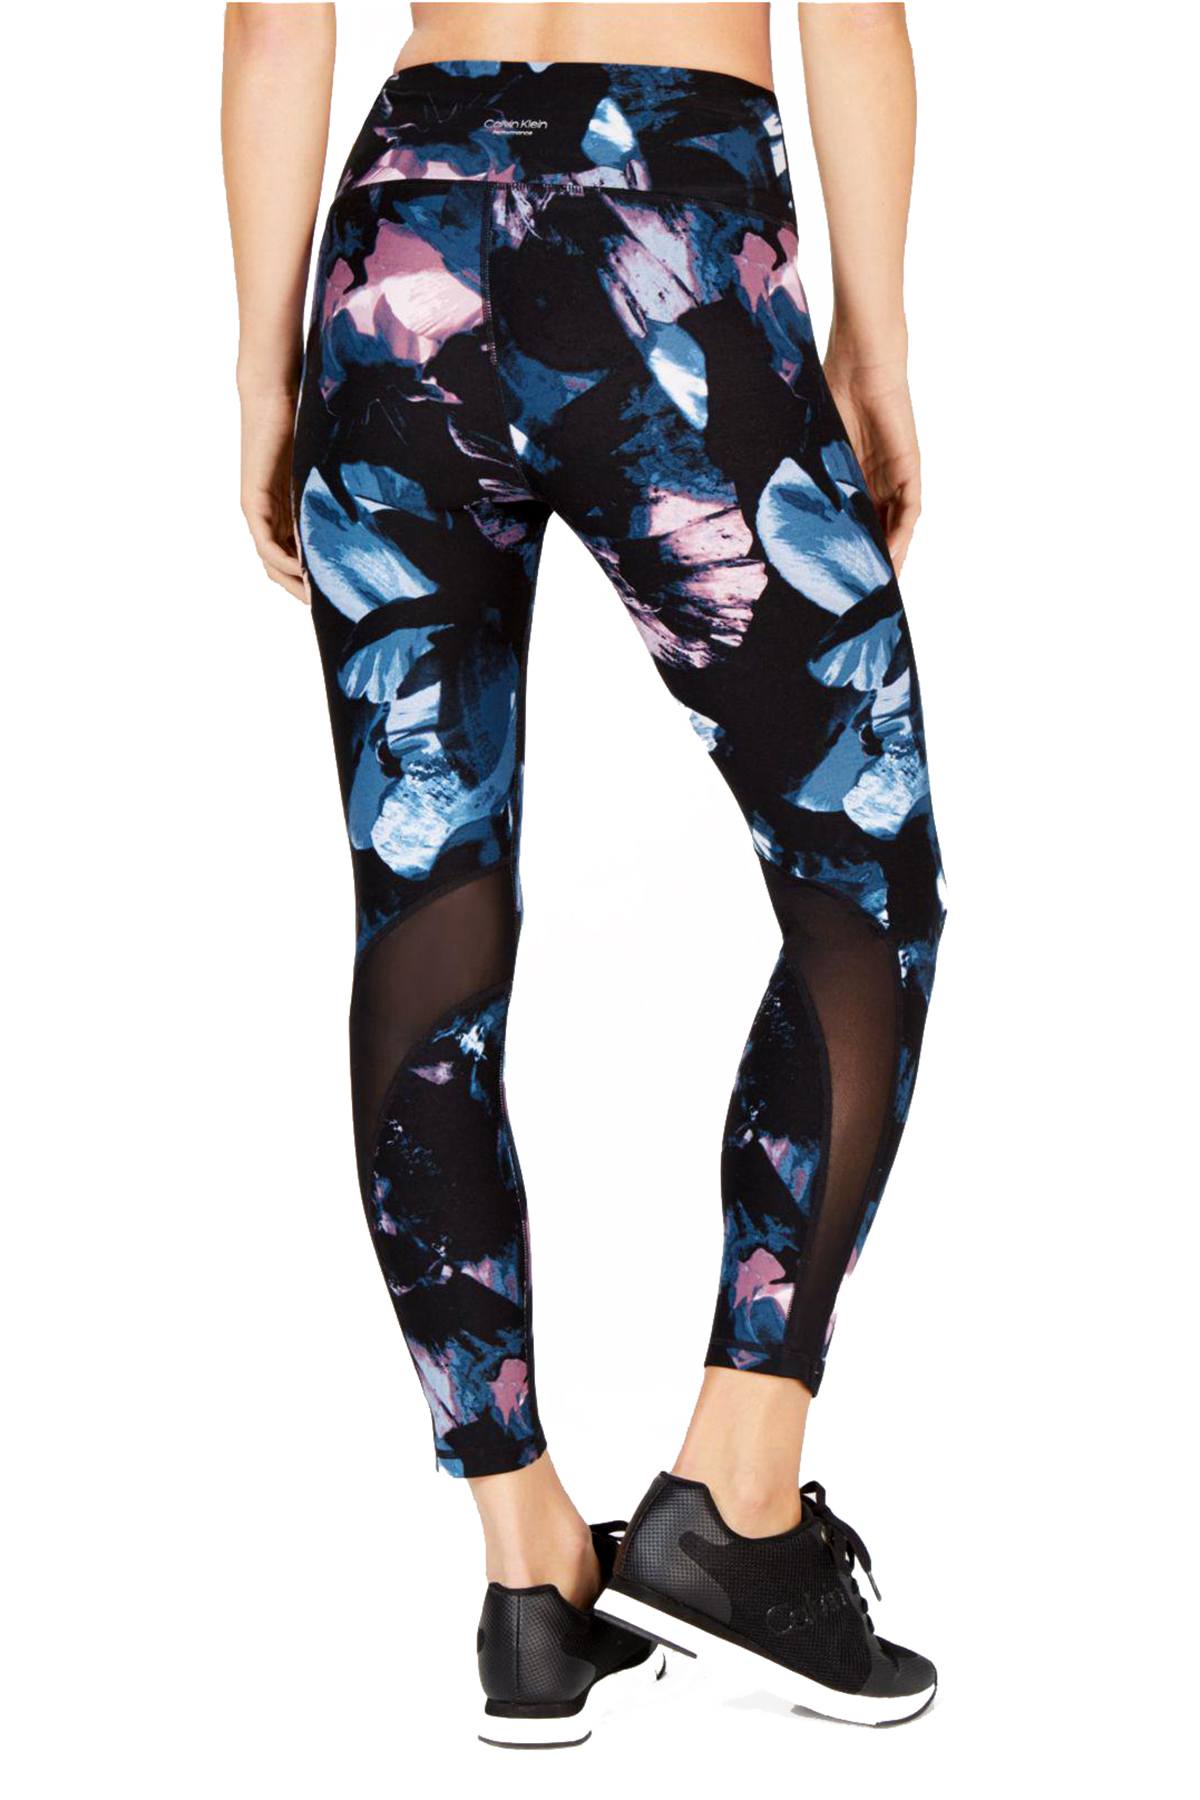 Calvin Klein Performance Eclipse-Combo Printed High-rise Compression Legging